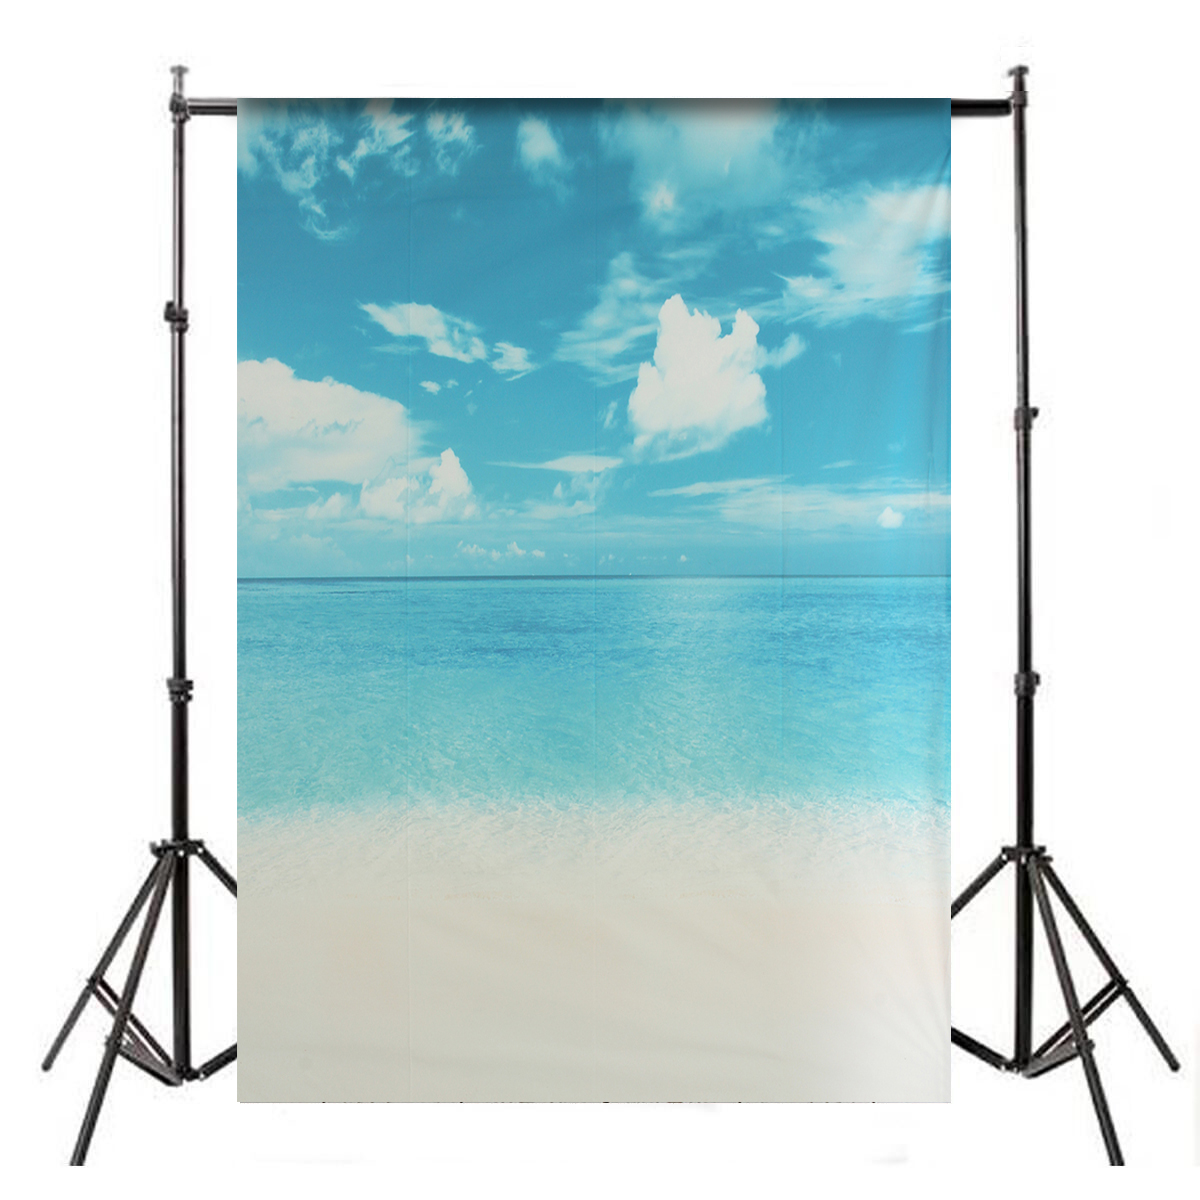 New-Durable-5x7ft-Cotton-Photography-Backdrop-Seaside-Beach-Background-Studio-Props-1952558-3